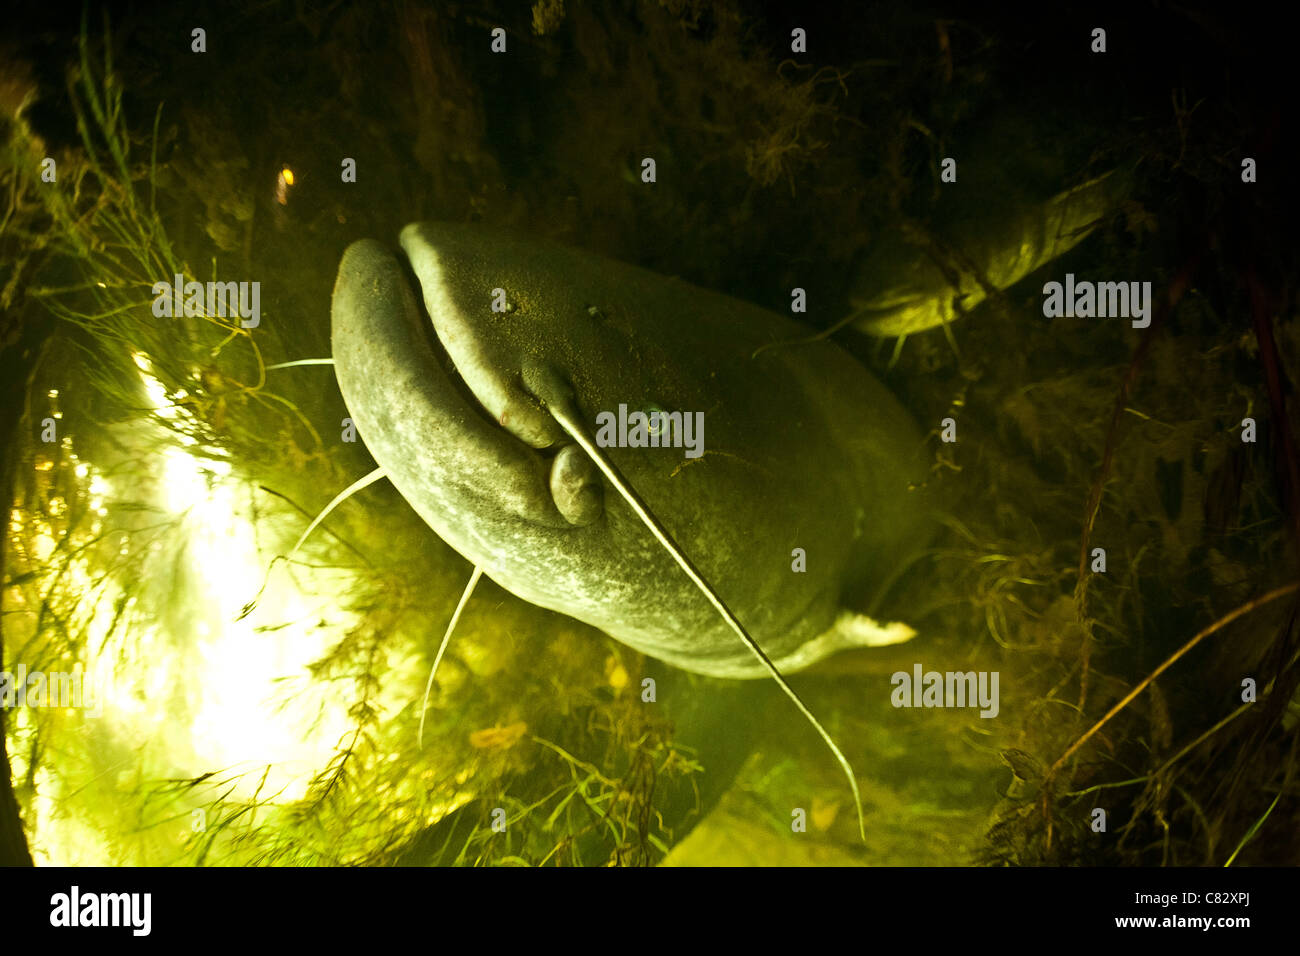 A Wels catfish (Silurus glanis) in the wild. That specimen measures nearly 8.2 ft and weighs 220 pounds or so. Stock Photo